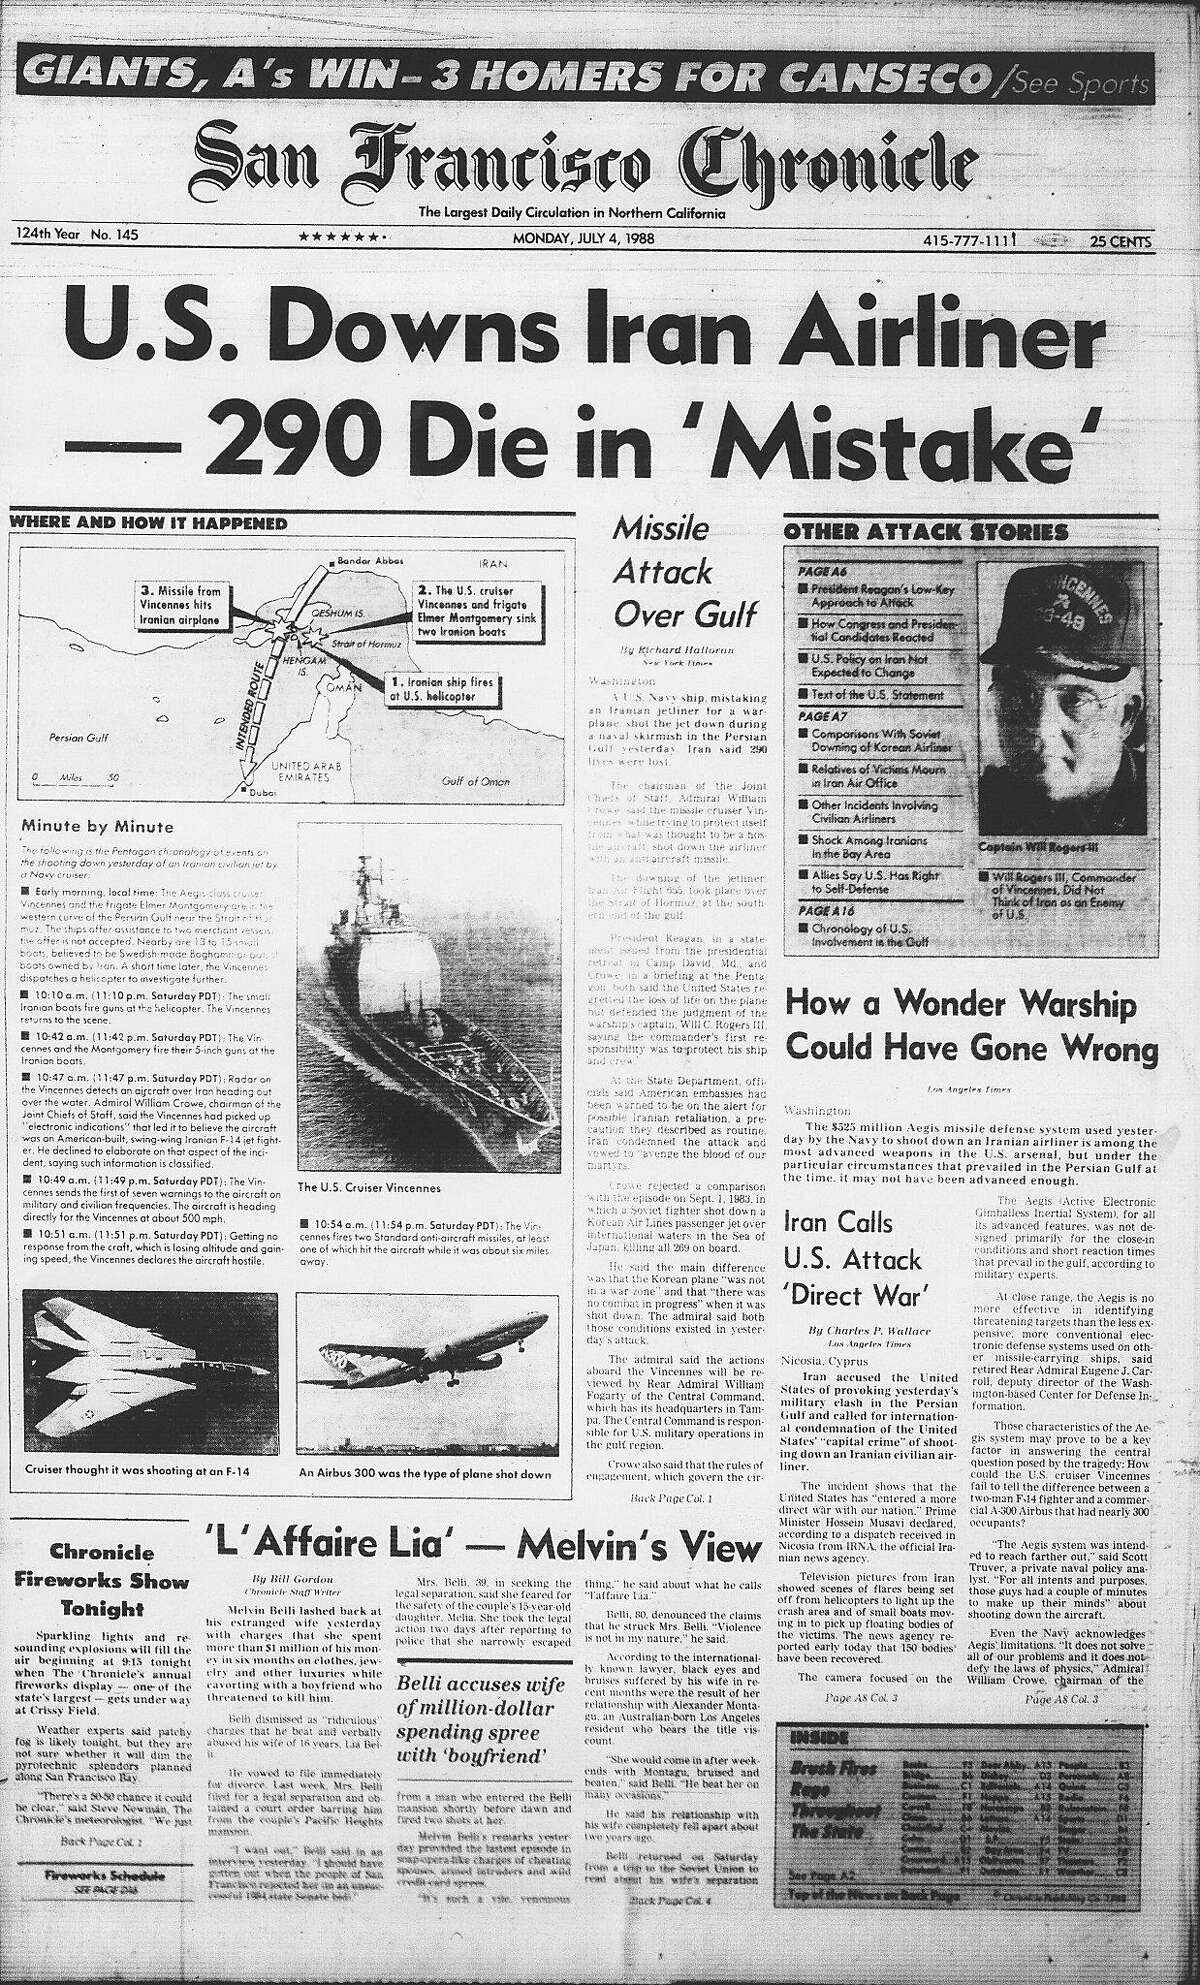 Historic Chronicle Front Page July 04, 1993 front page United States military accidentally shoots down an Iran Airliner Chron365, Chroncover